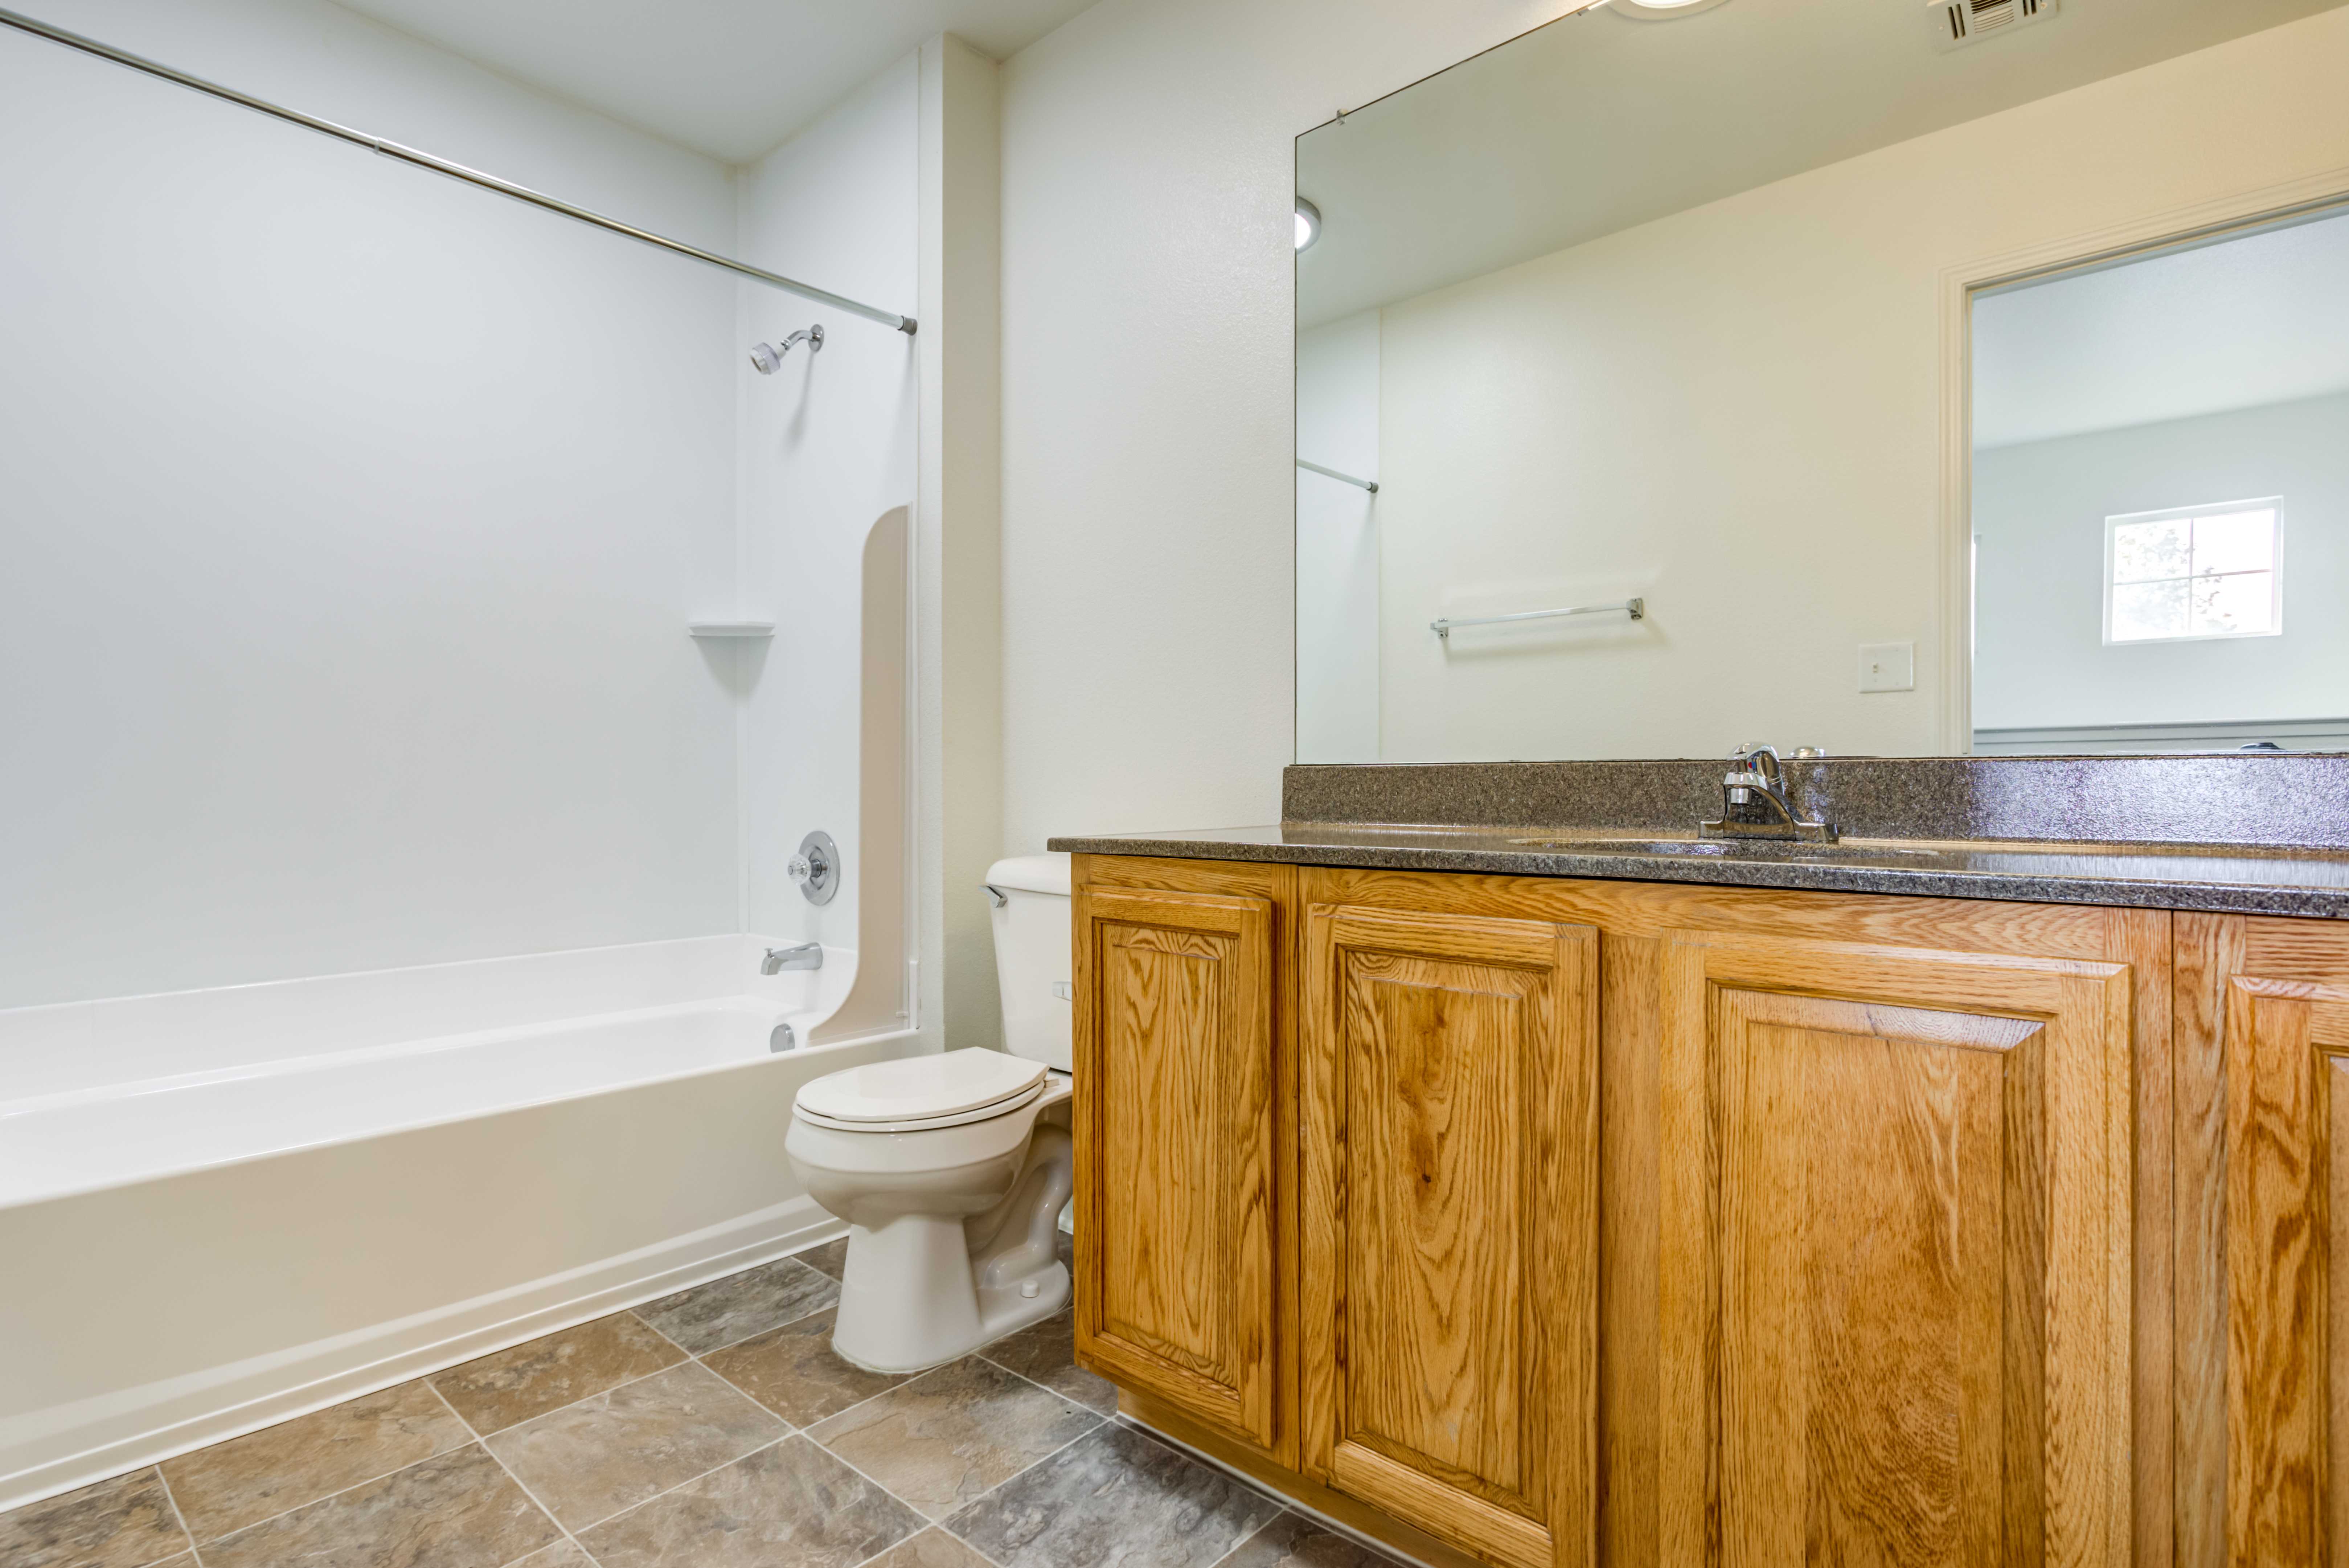 A bathroom in a home at Stone Park in Lemoore, California